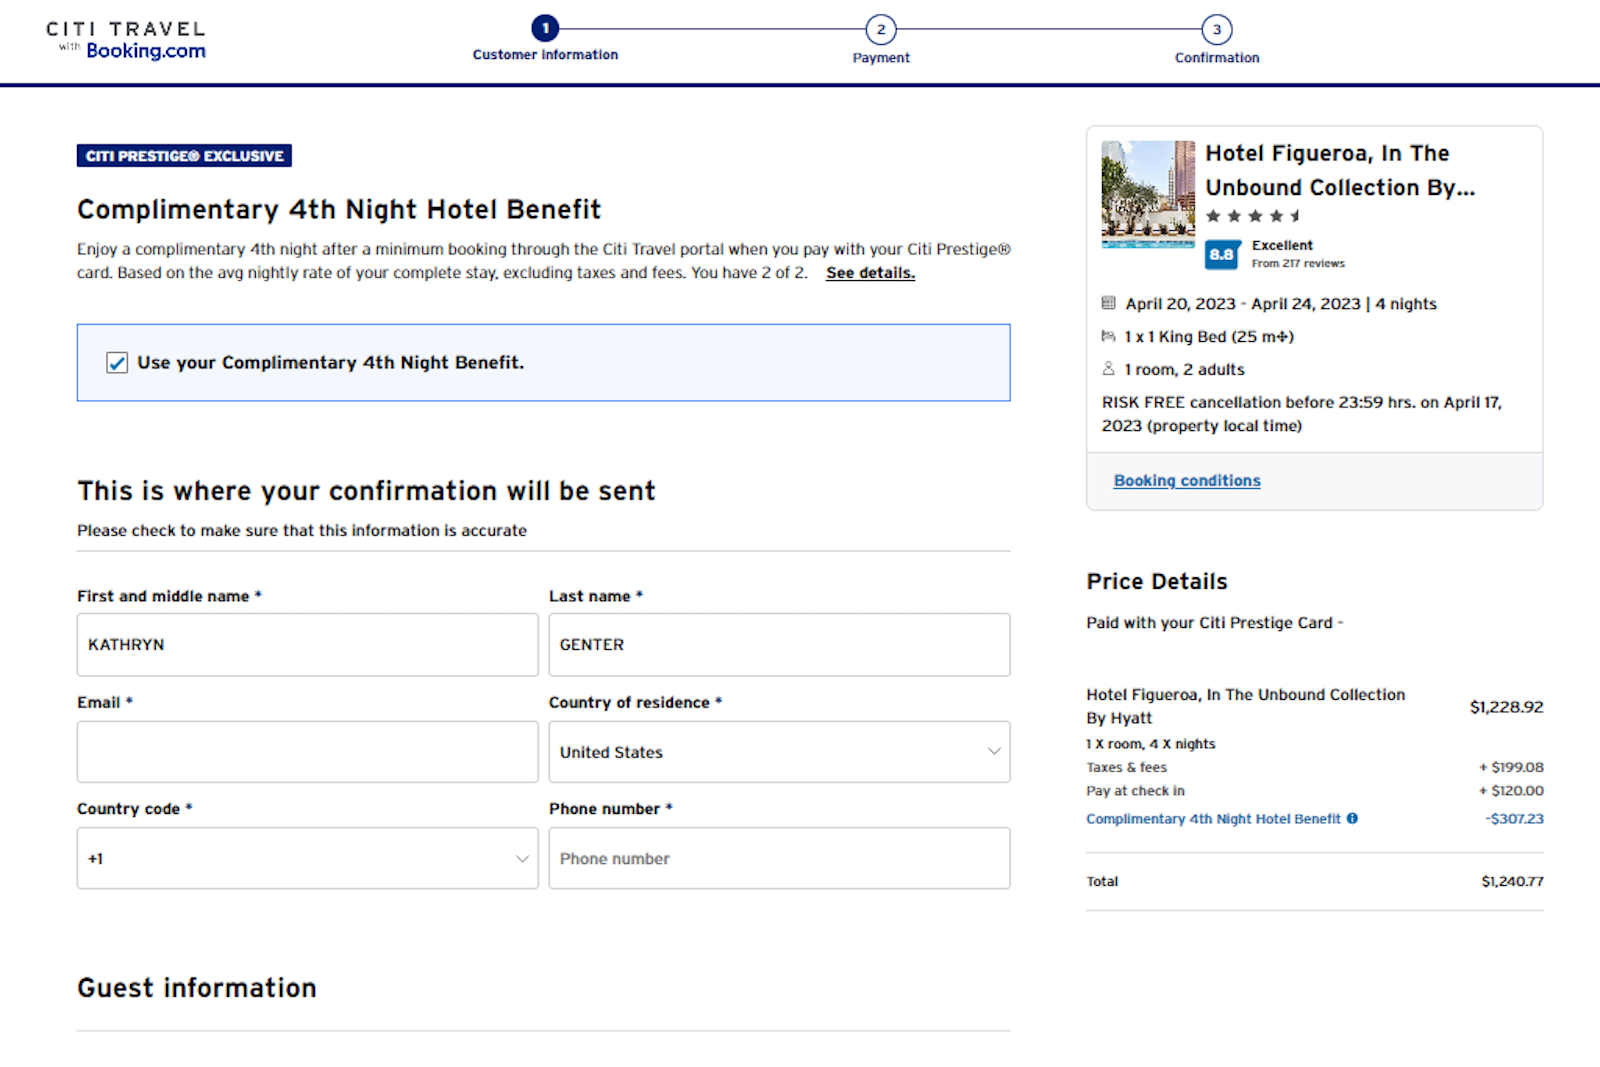 final page for payment in Citi travel portal when using 4th night free benefit from Citi Prestige card